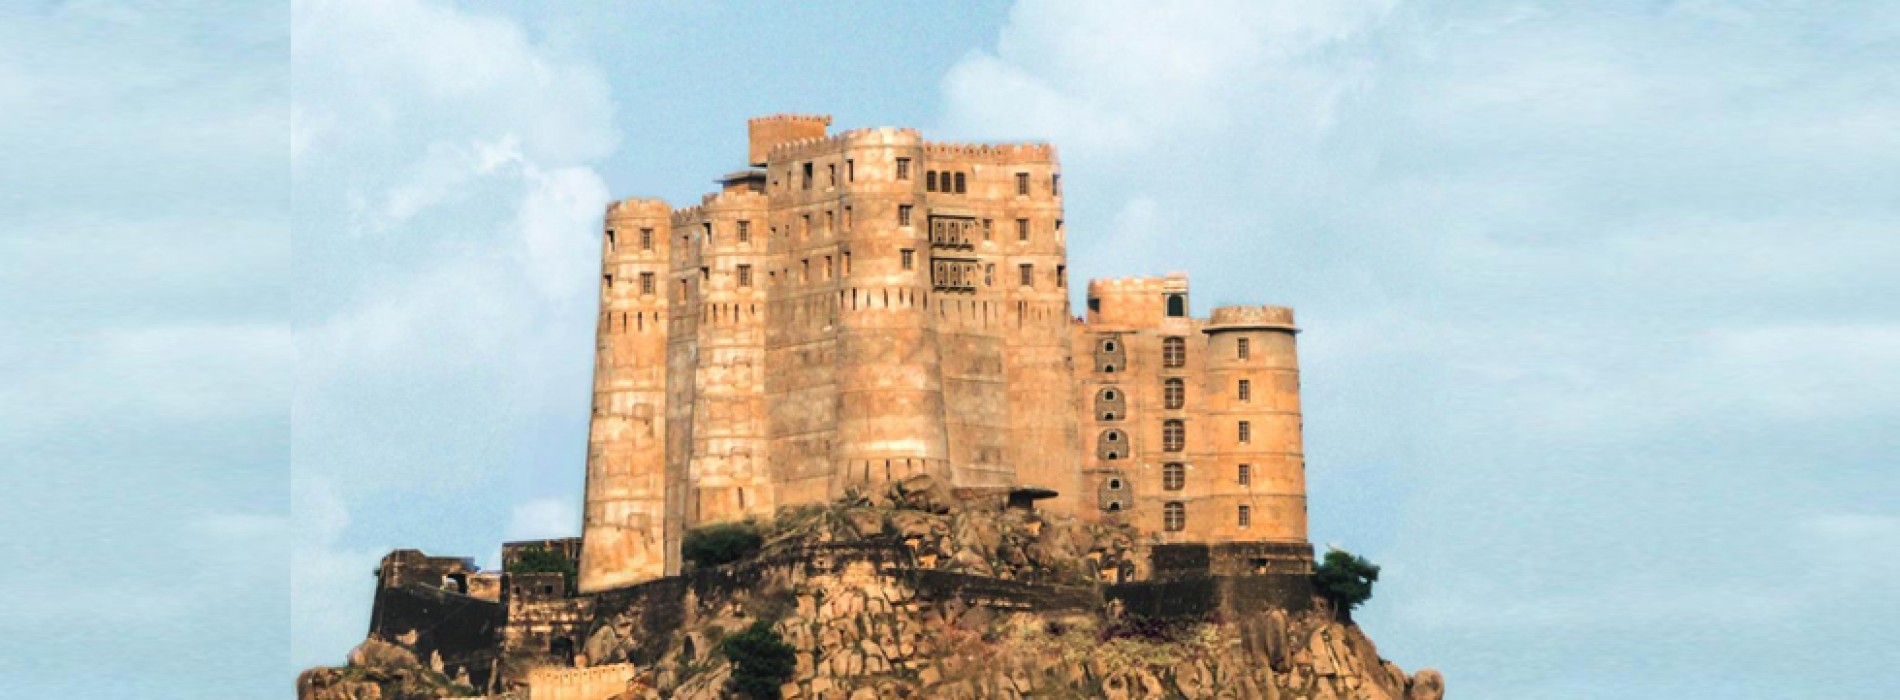 Alila to reopen 230-year-old fort in Rajasthan